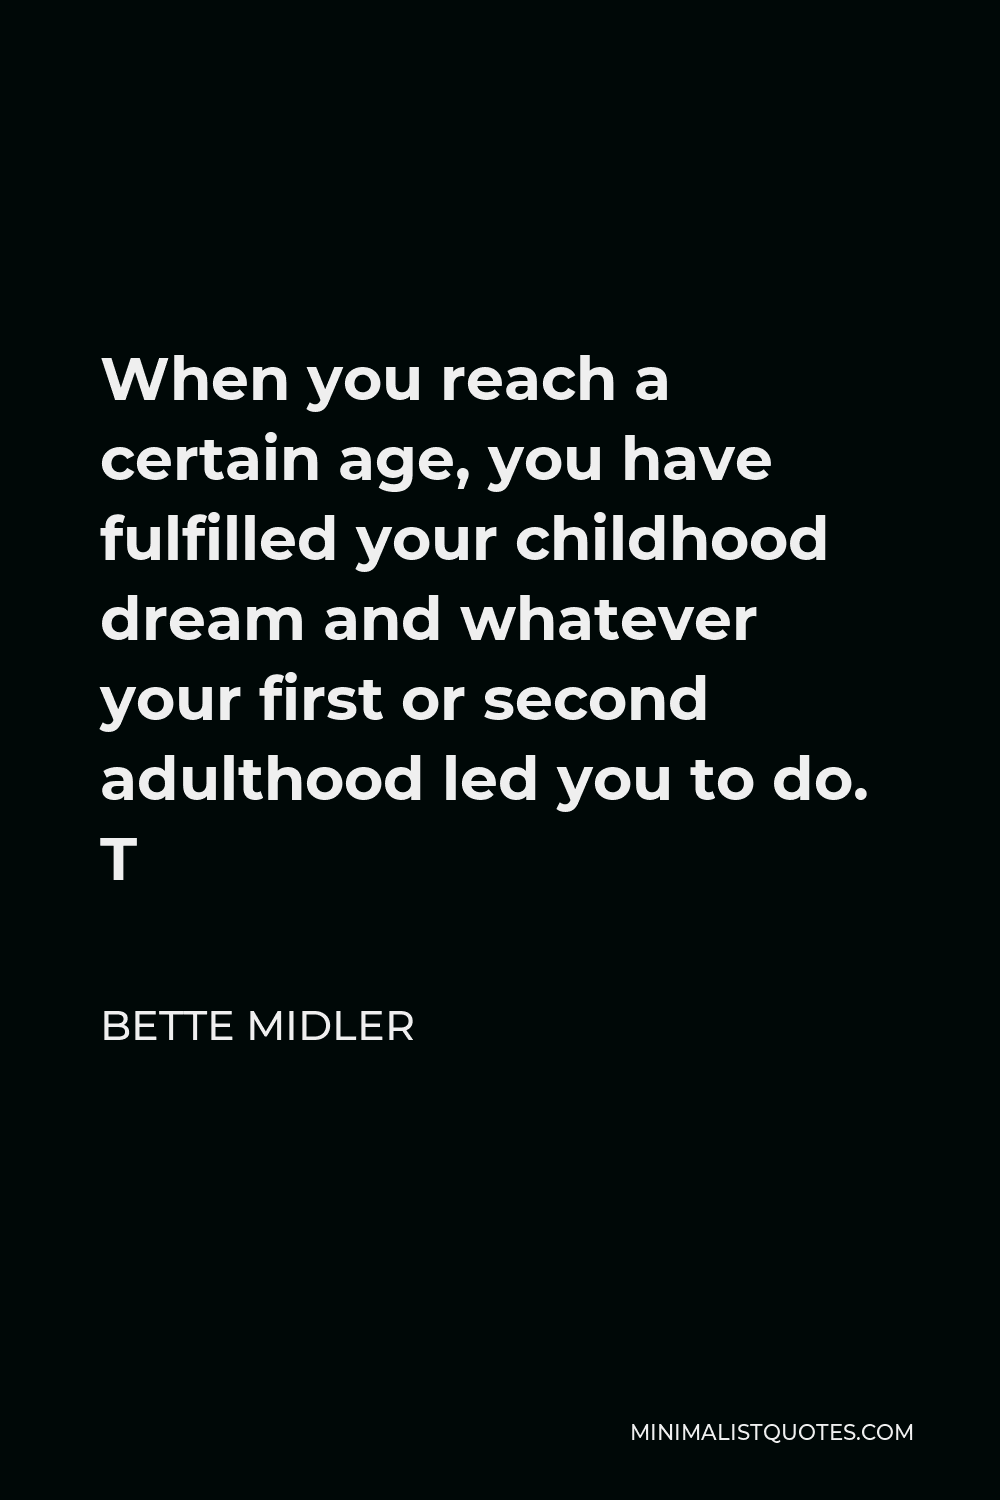 Bette Midler Quote - When you reach a certain age, you have fulfilled your childhood dream and whatever your first or second adulthood led you to do. T